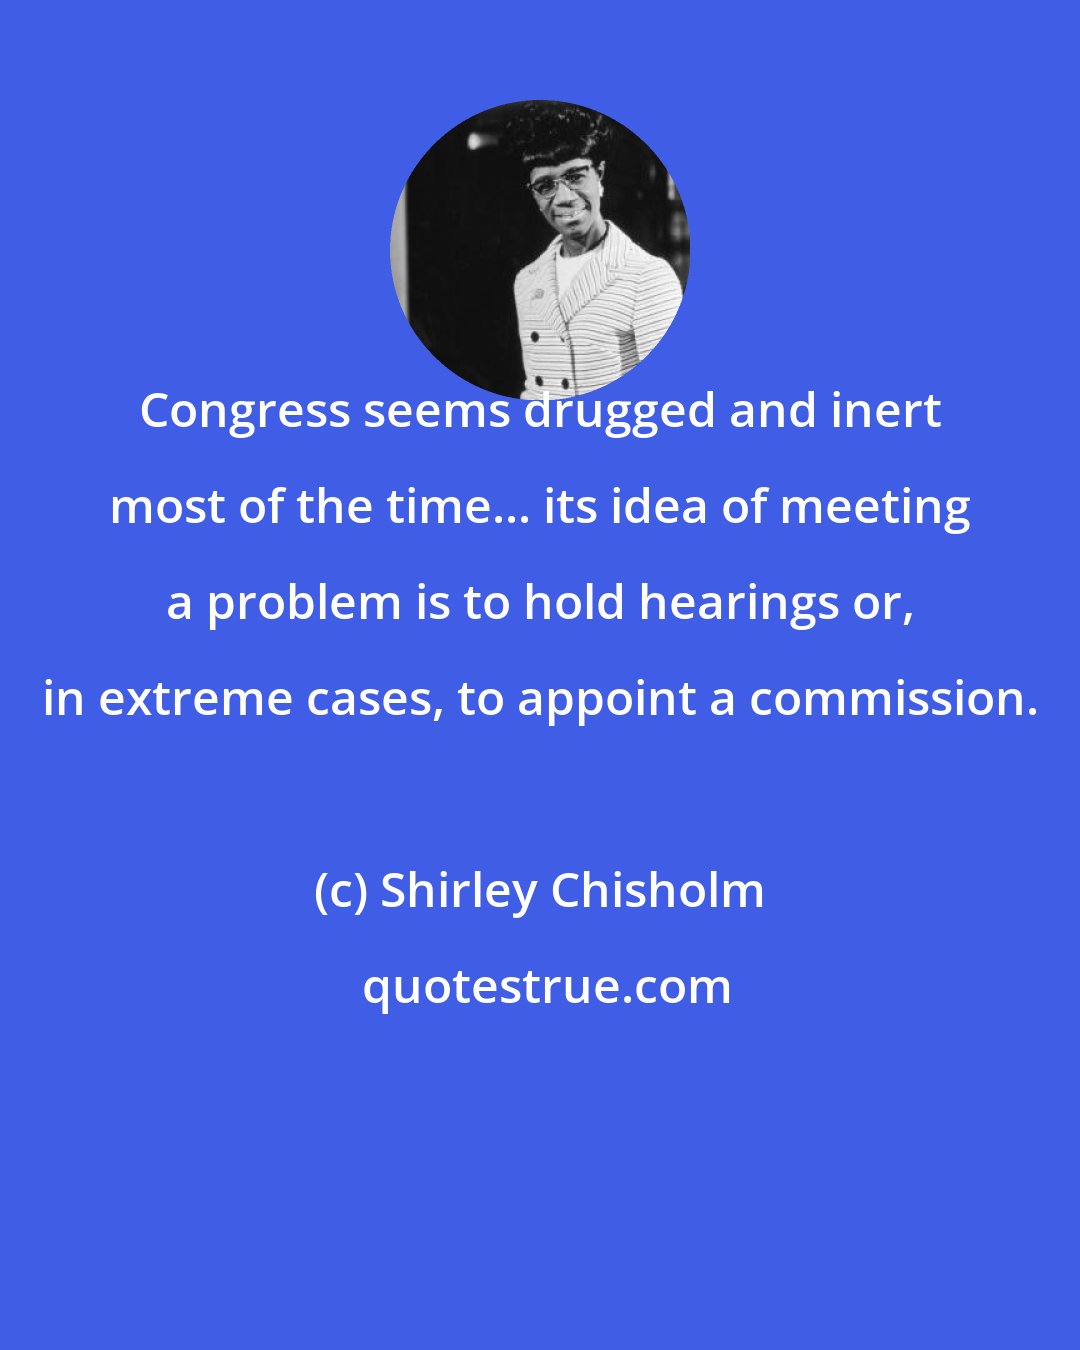 Shirley Chisholm: Congress seems drugged and inert most of the time... its idea of meeting a problem is to hold hearings or, in extreme cases, to appoint a commission.